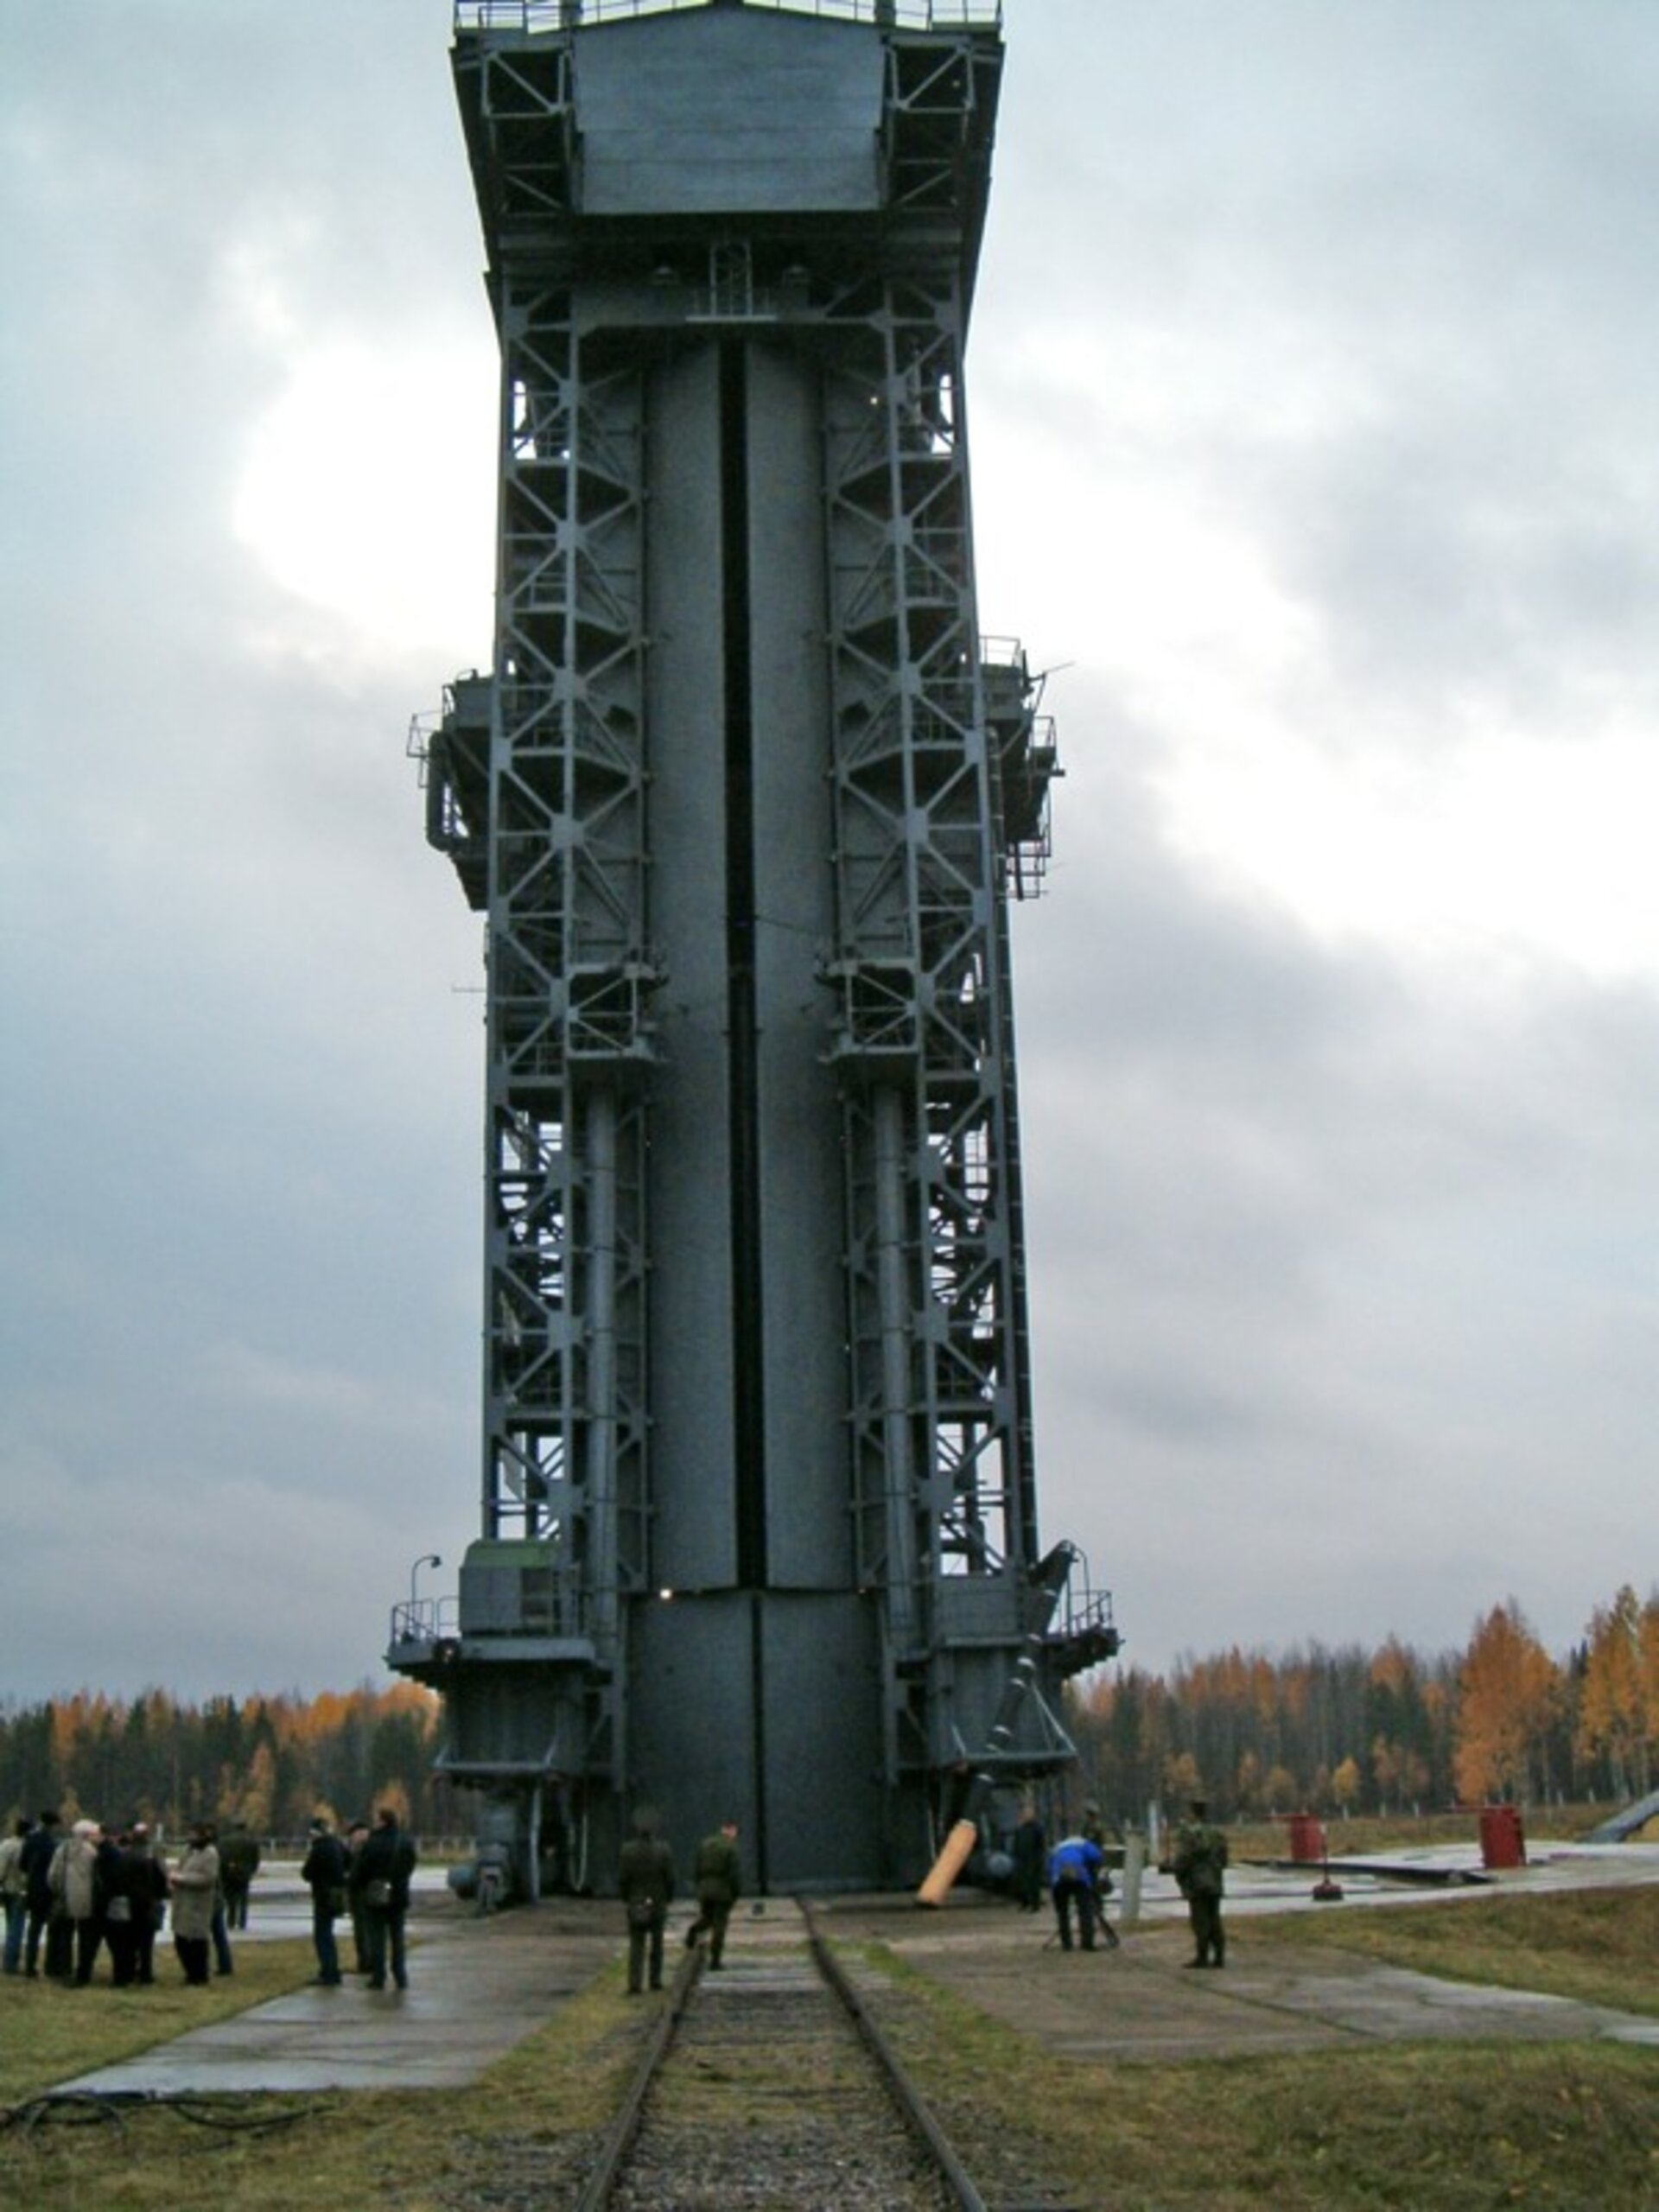 CryoSat's launch tower